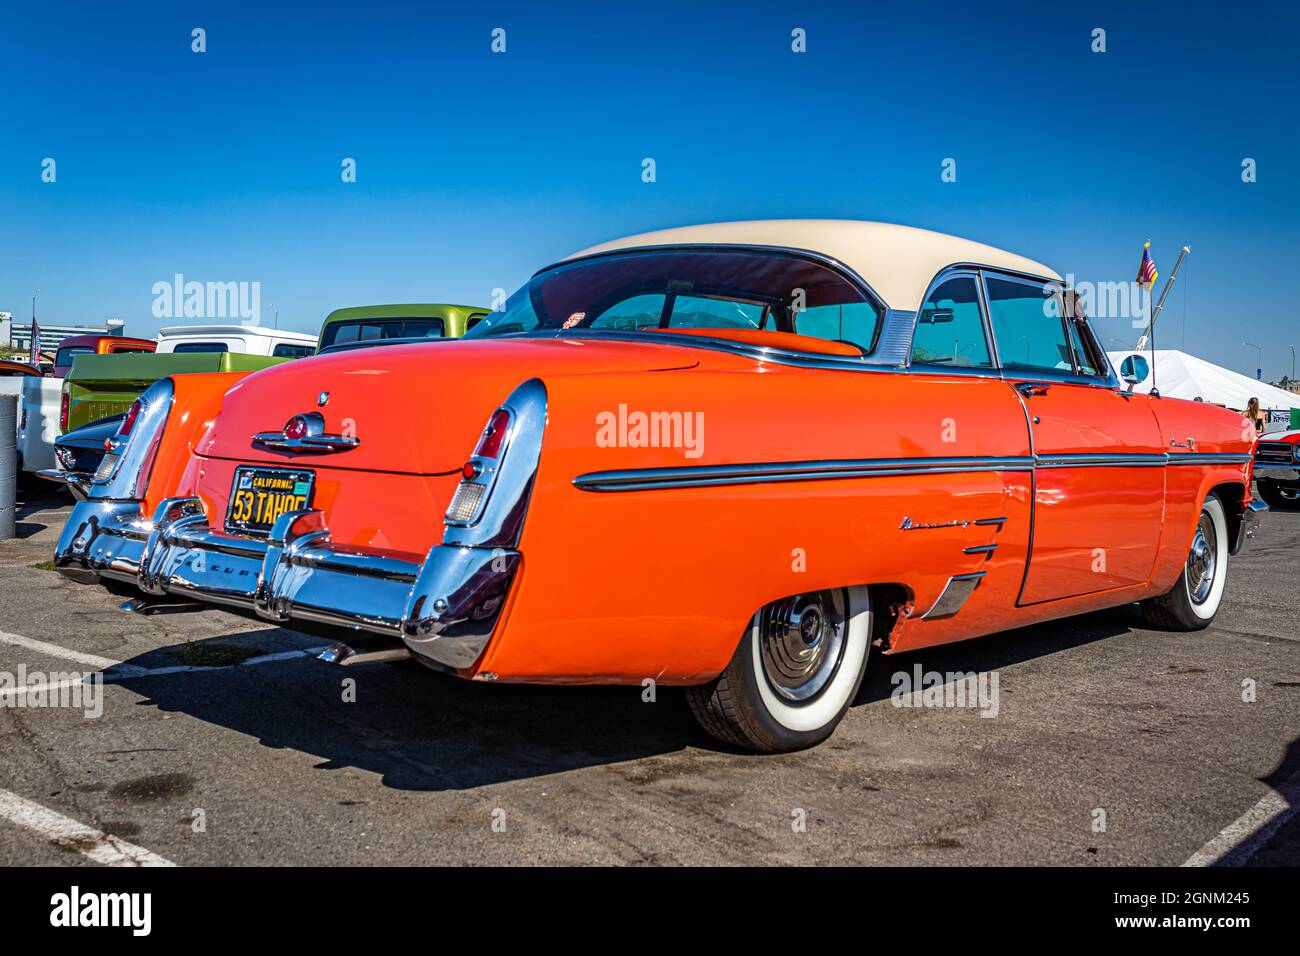 Reno, NV - August 4, 2021: 1953 Mercury Monterey hardtop coupe at a local car show. Stock Photo